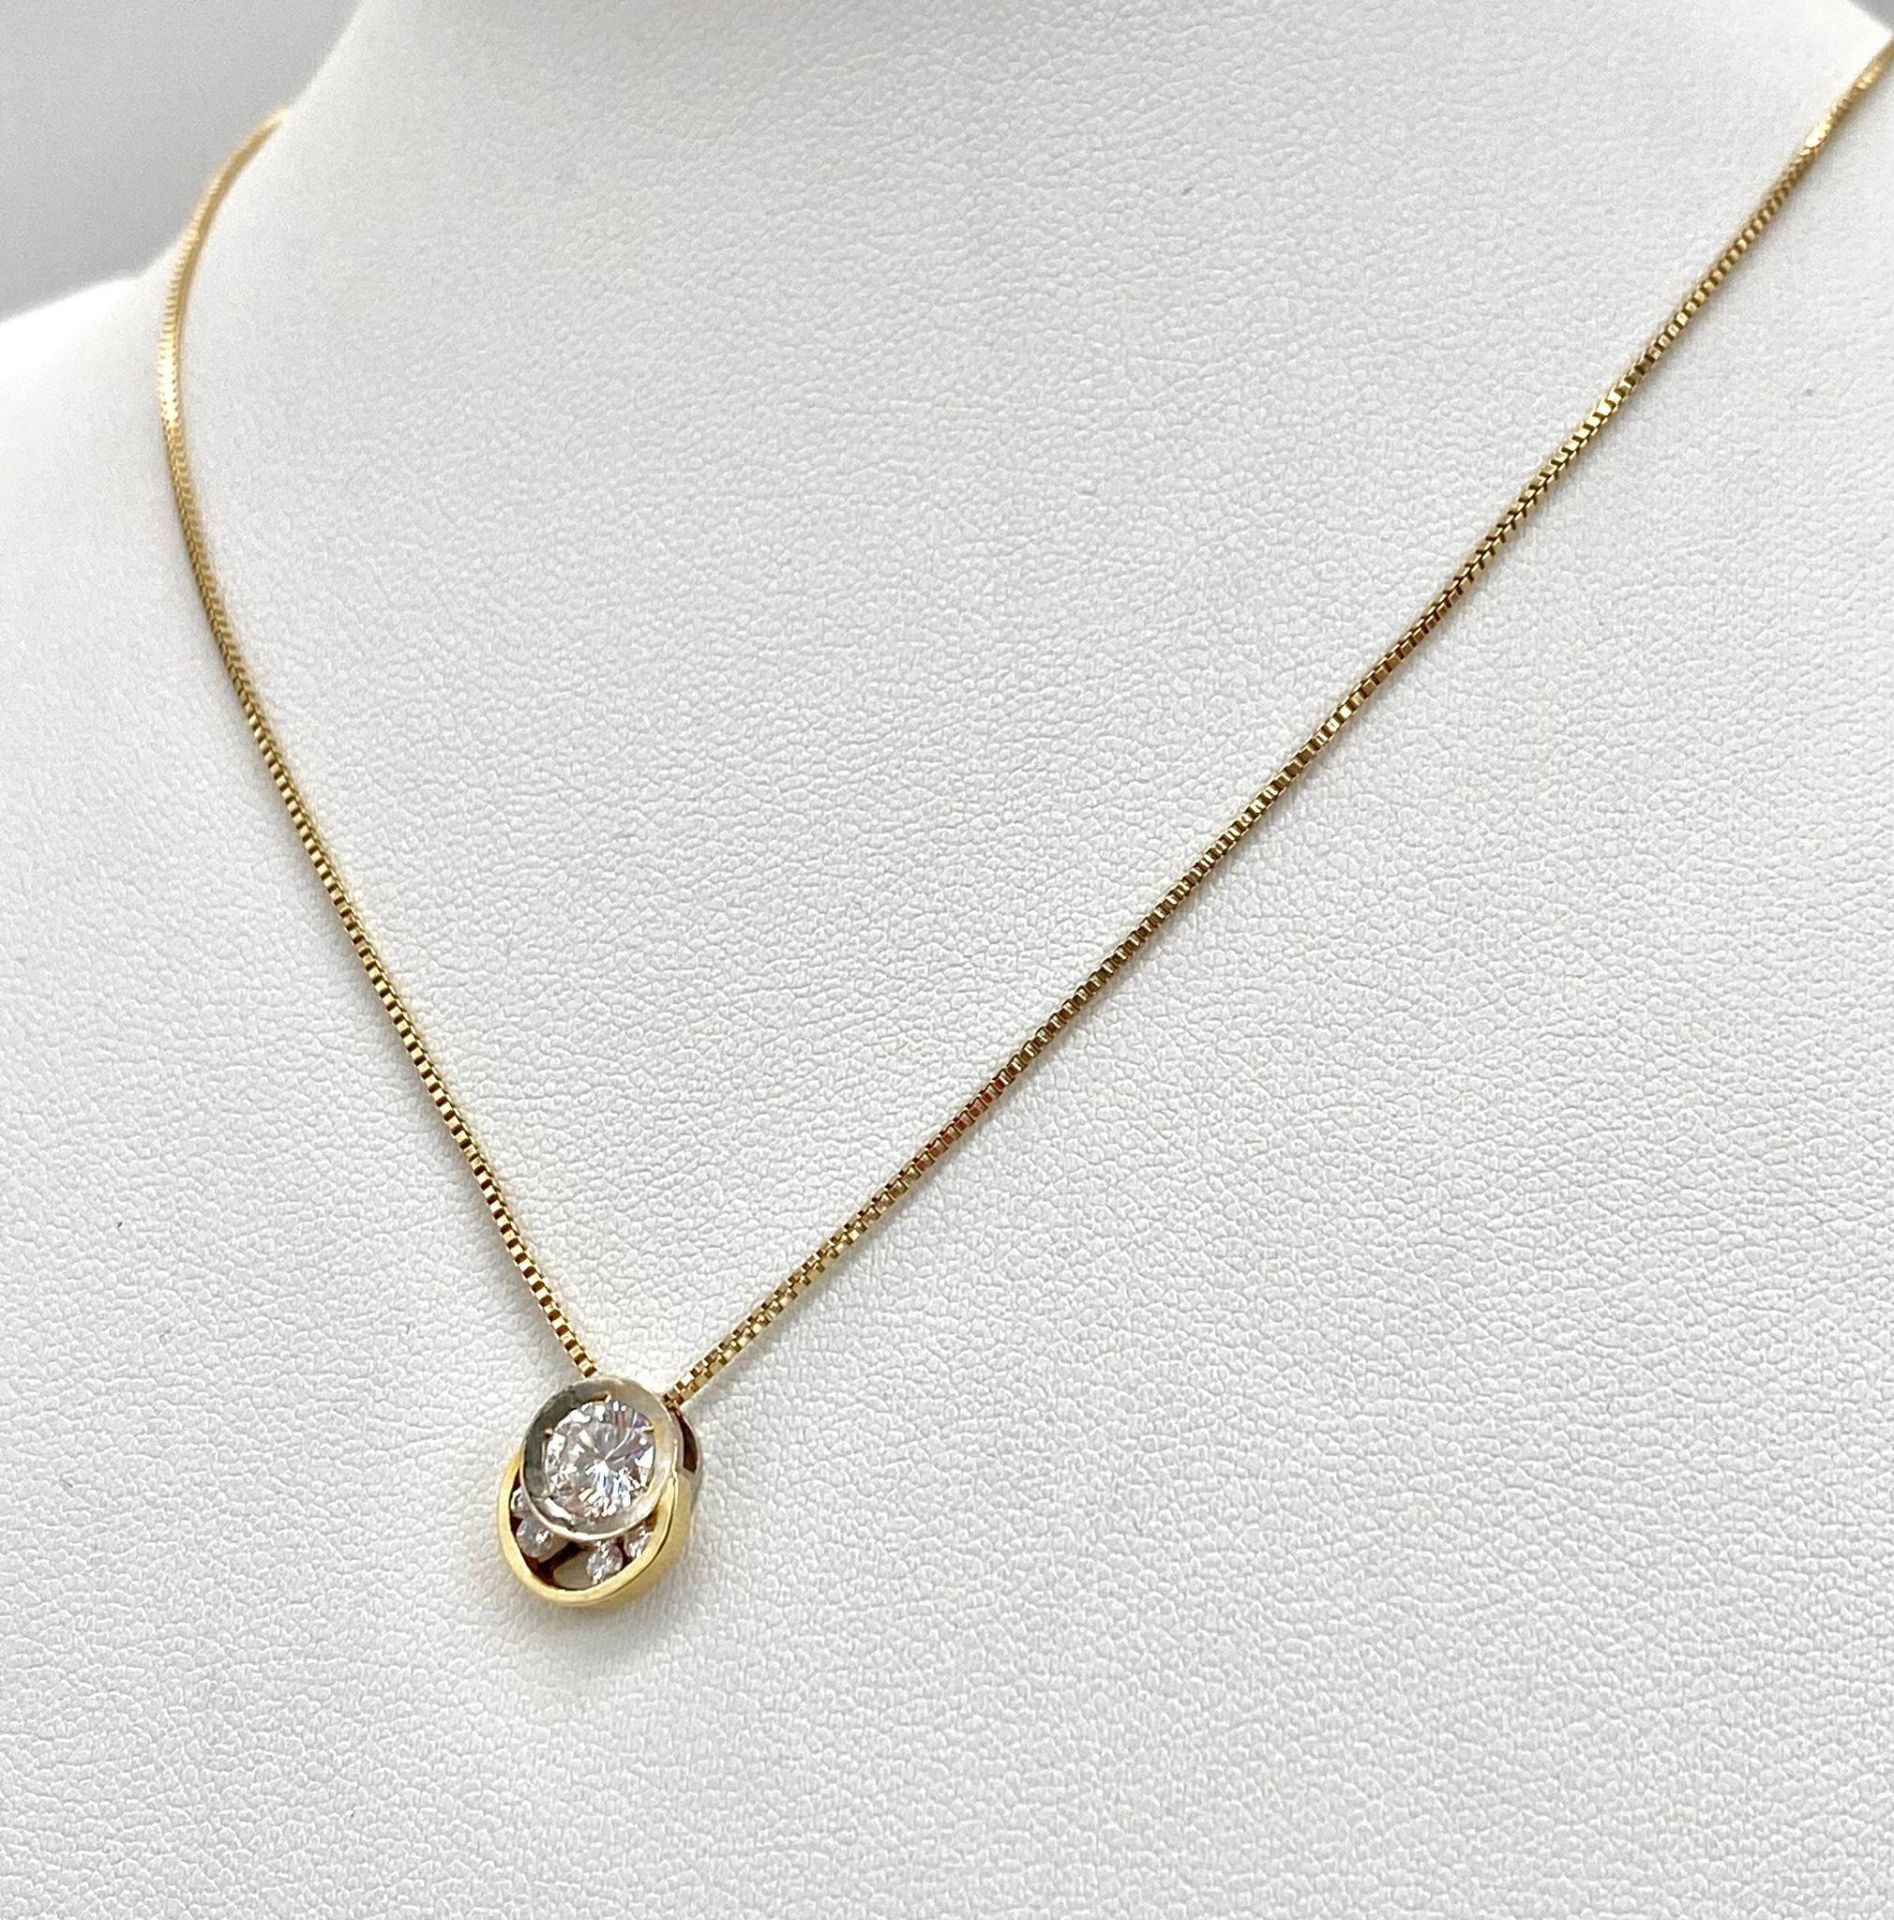 A DESIGNER WHITE AND YELLOW GOLD DIAMOND PENDANT ON A 40cme 14K GOLD CHAIN .4.25gms 009048